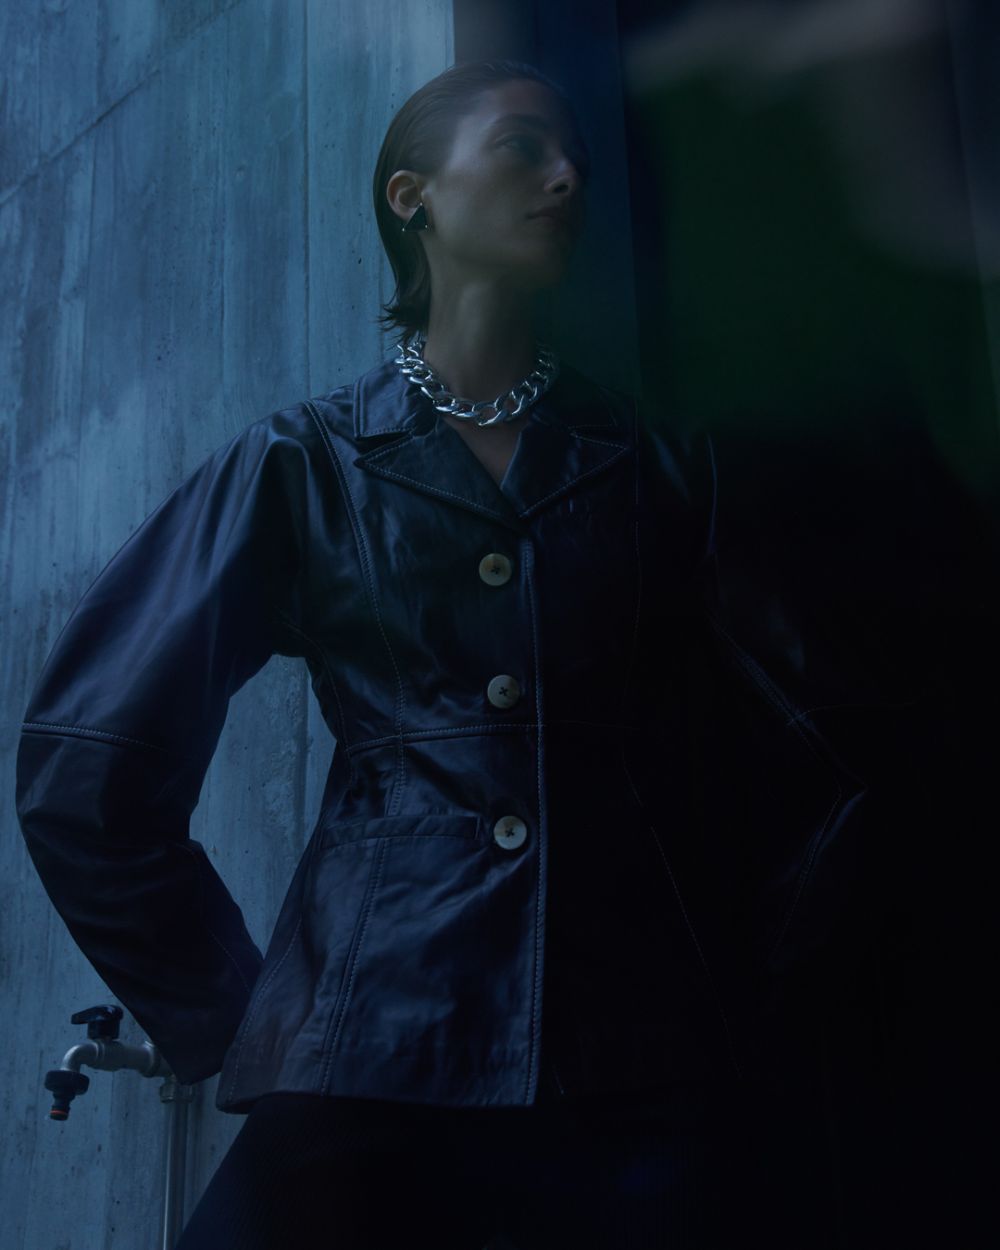  Clothing & Accessories: Leather blazer by Ganni / Triangle sterling silver single clip earring by Prada / Sterling silver-plated brass curb chain choker-style necklace by Saskia Diez / Photographer: Andreas Ortner. Stylist: Elke Dostal. Beauty Artist: Sarah Rabel 